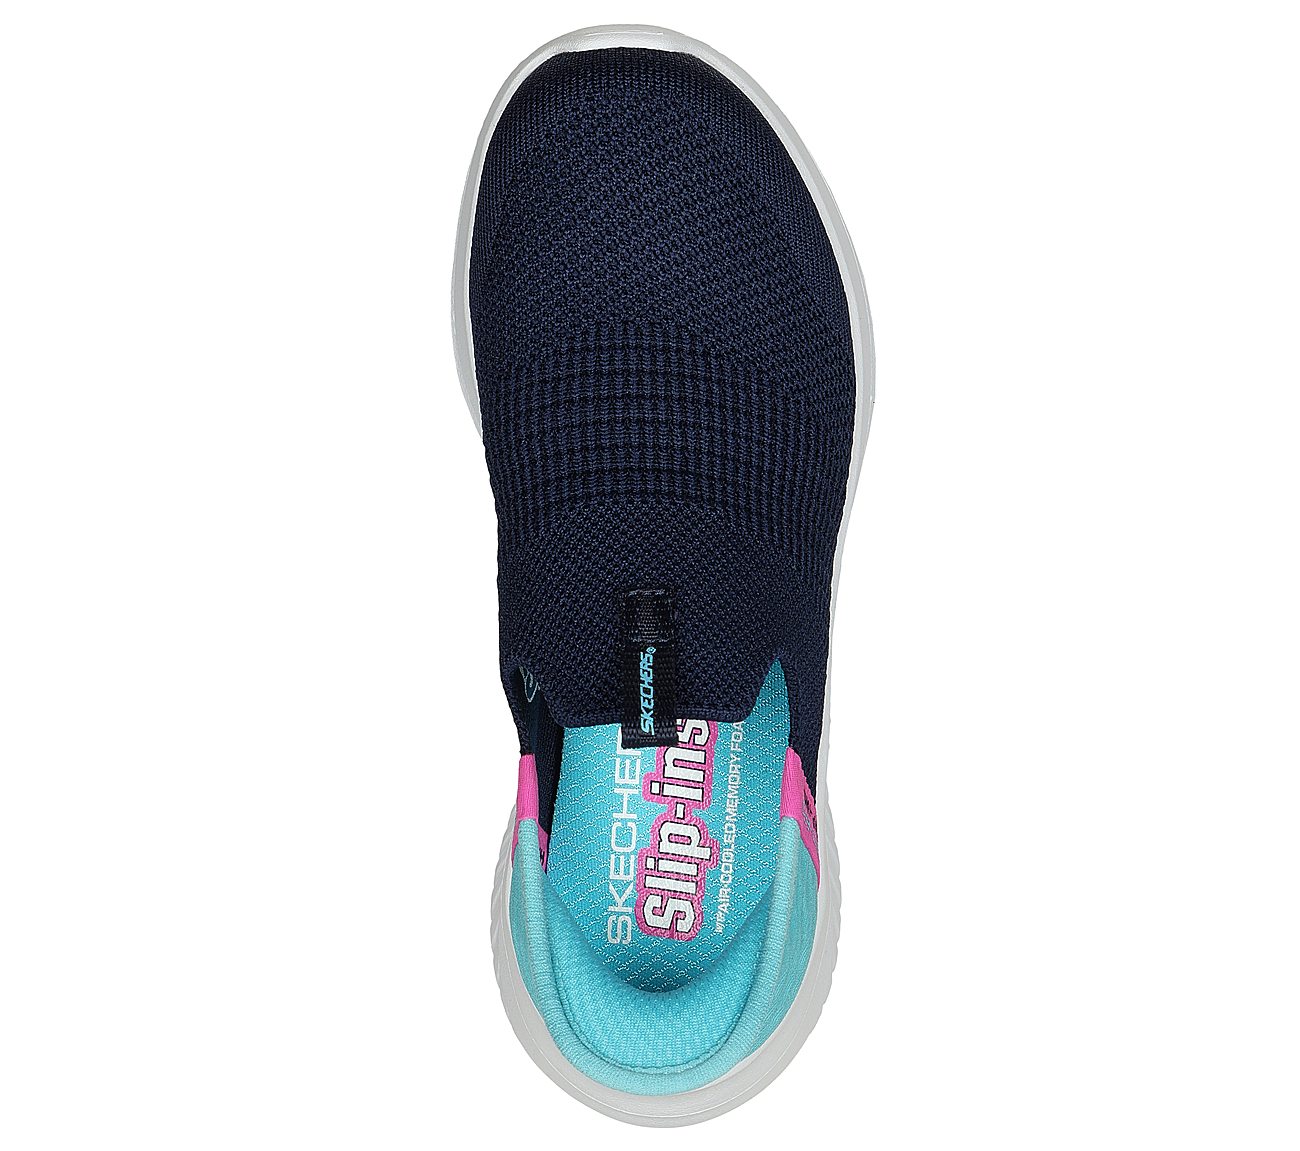 ULTRA FLEX 3.0 - FRESH TIME, NAVY/TURQUOISE Footwear Top View